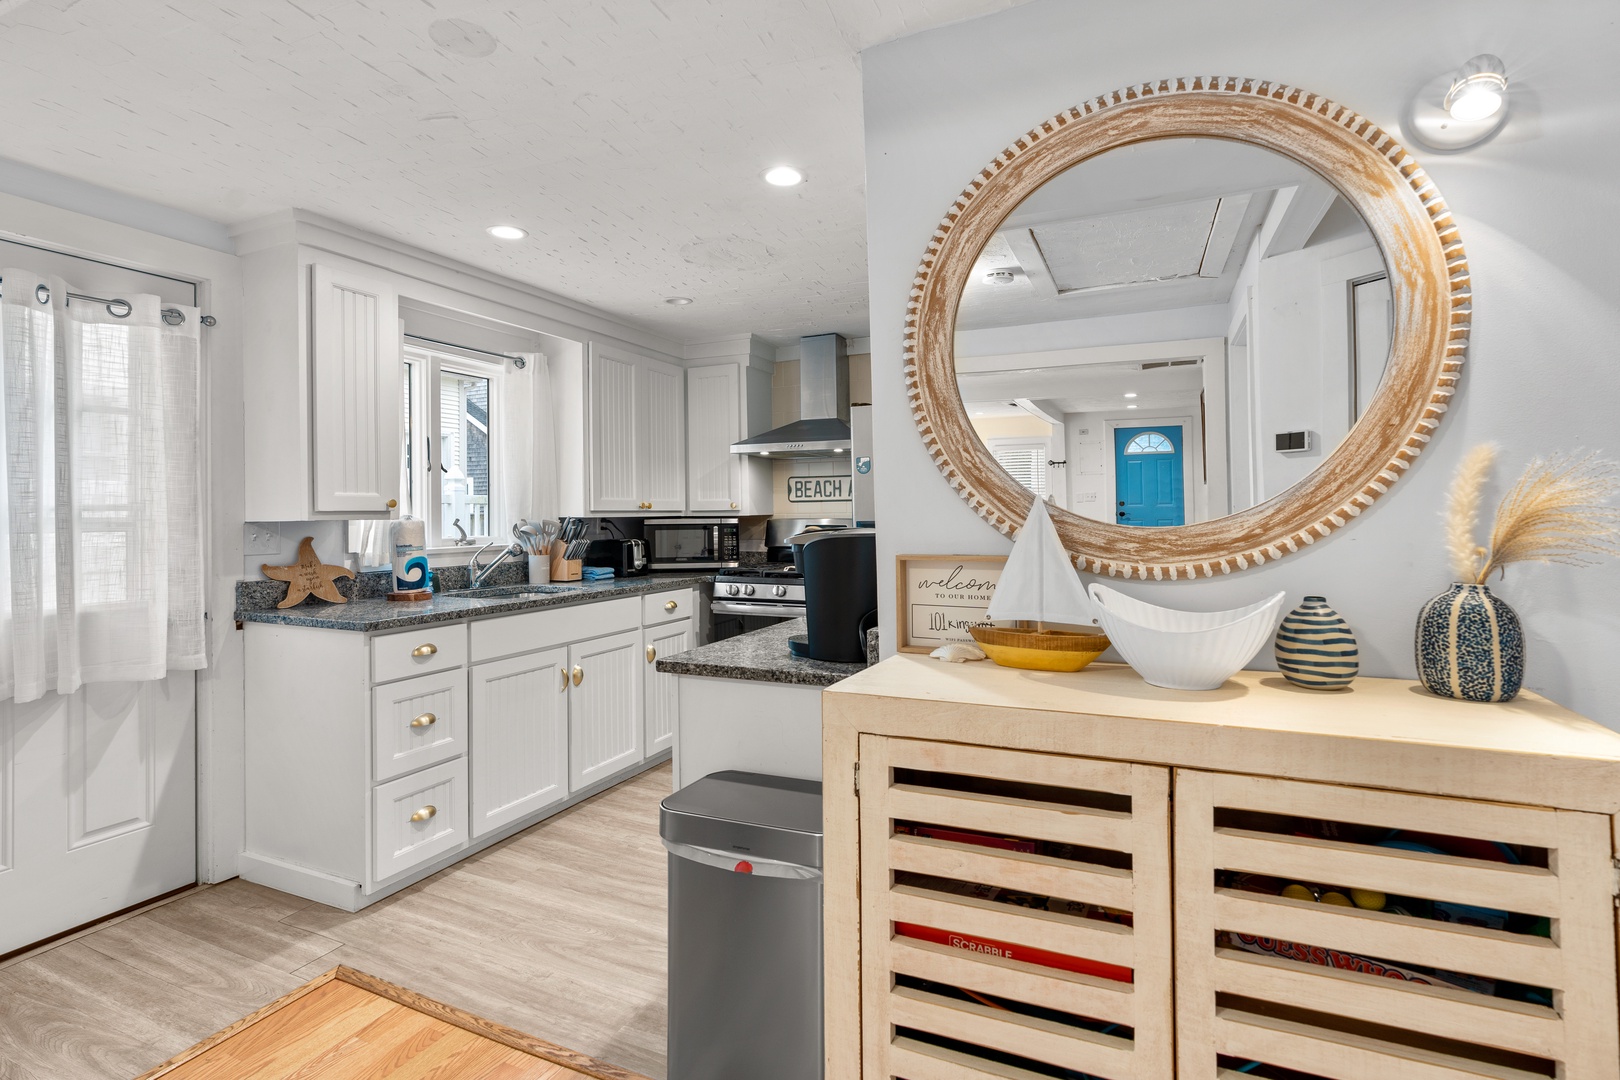 The breezy kitchen offers ample space & all the comforts of home